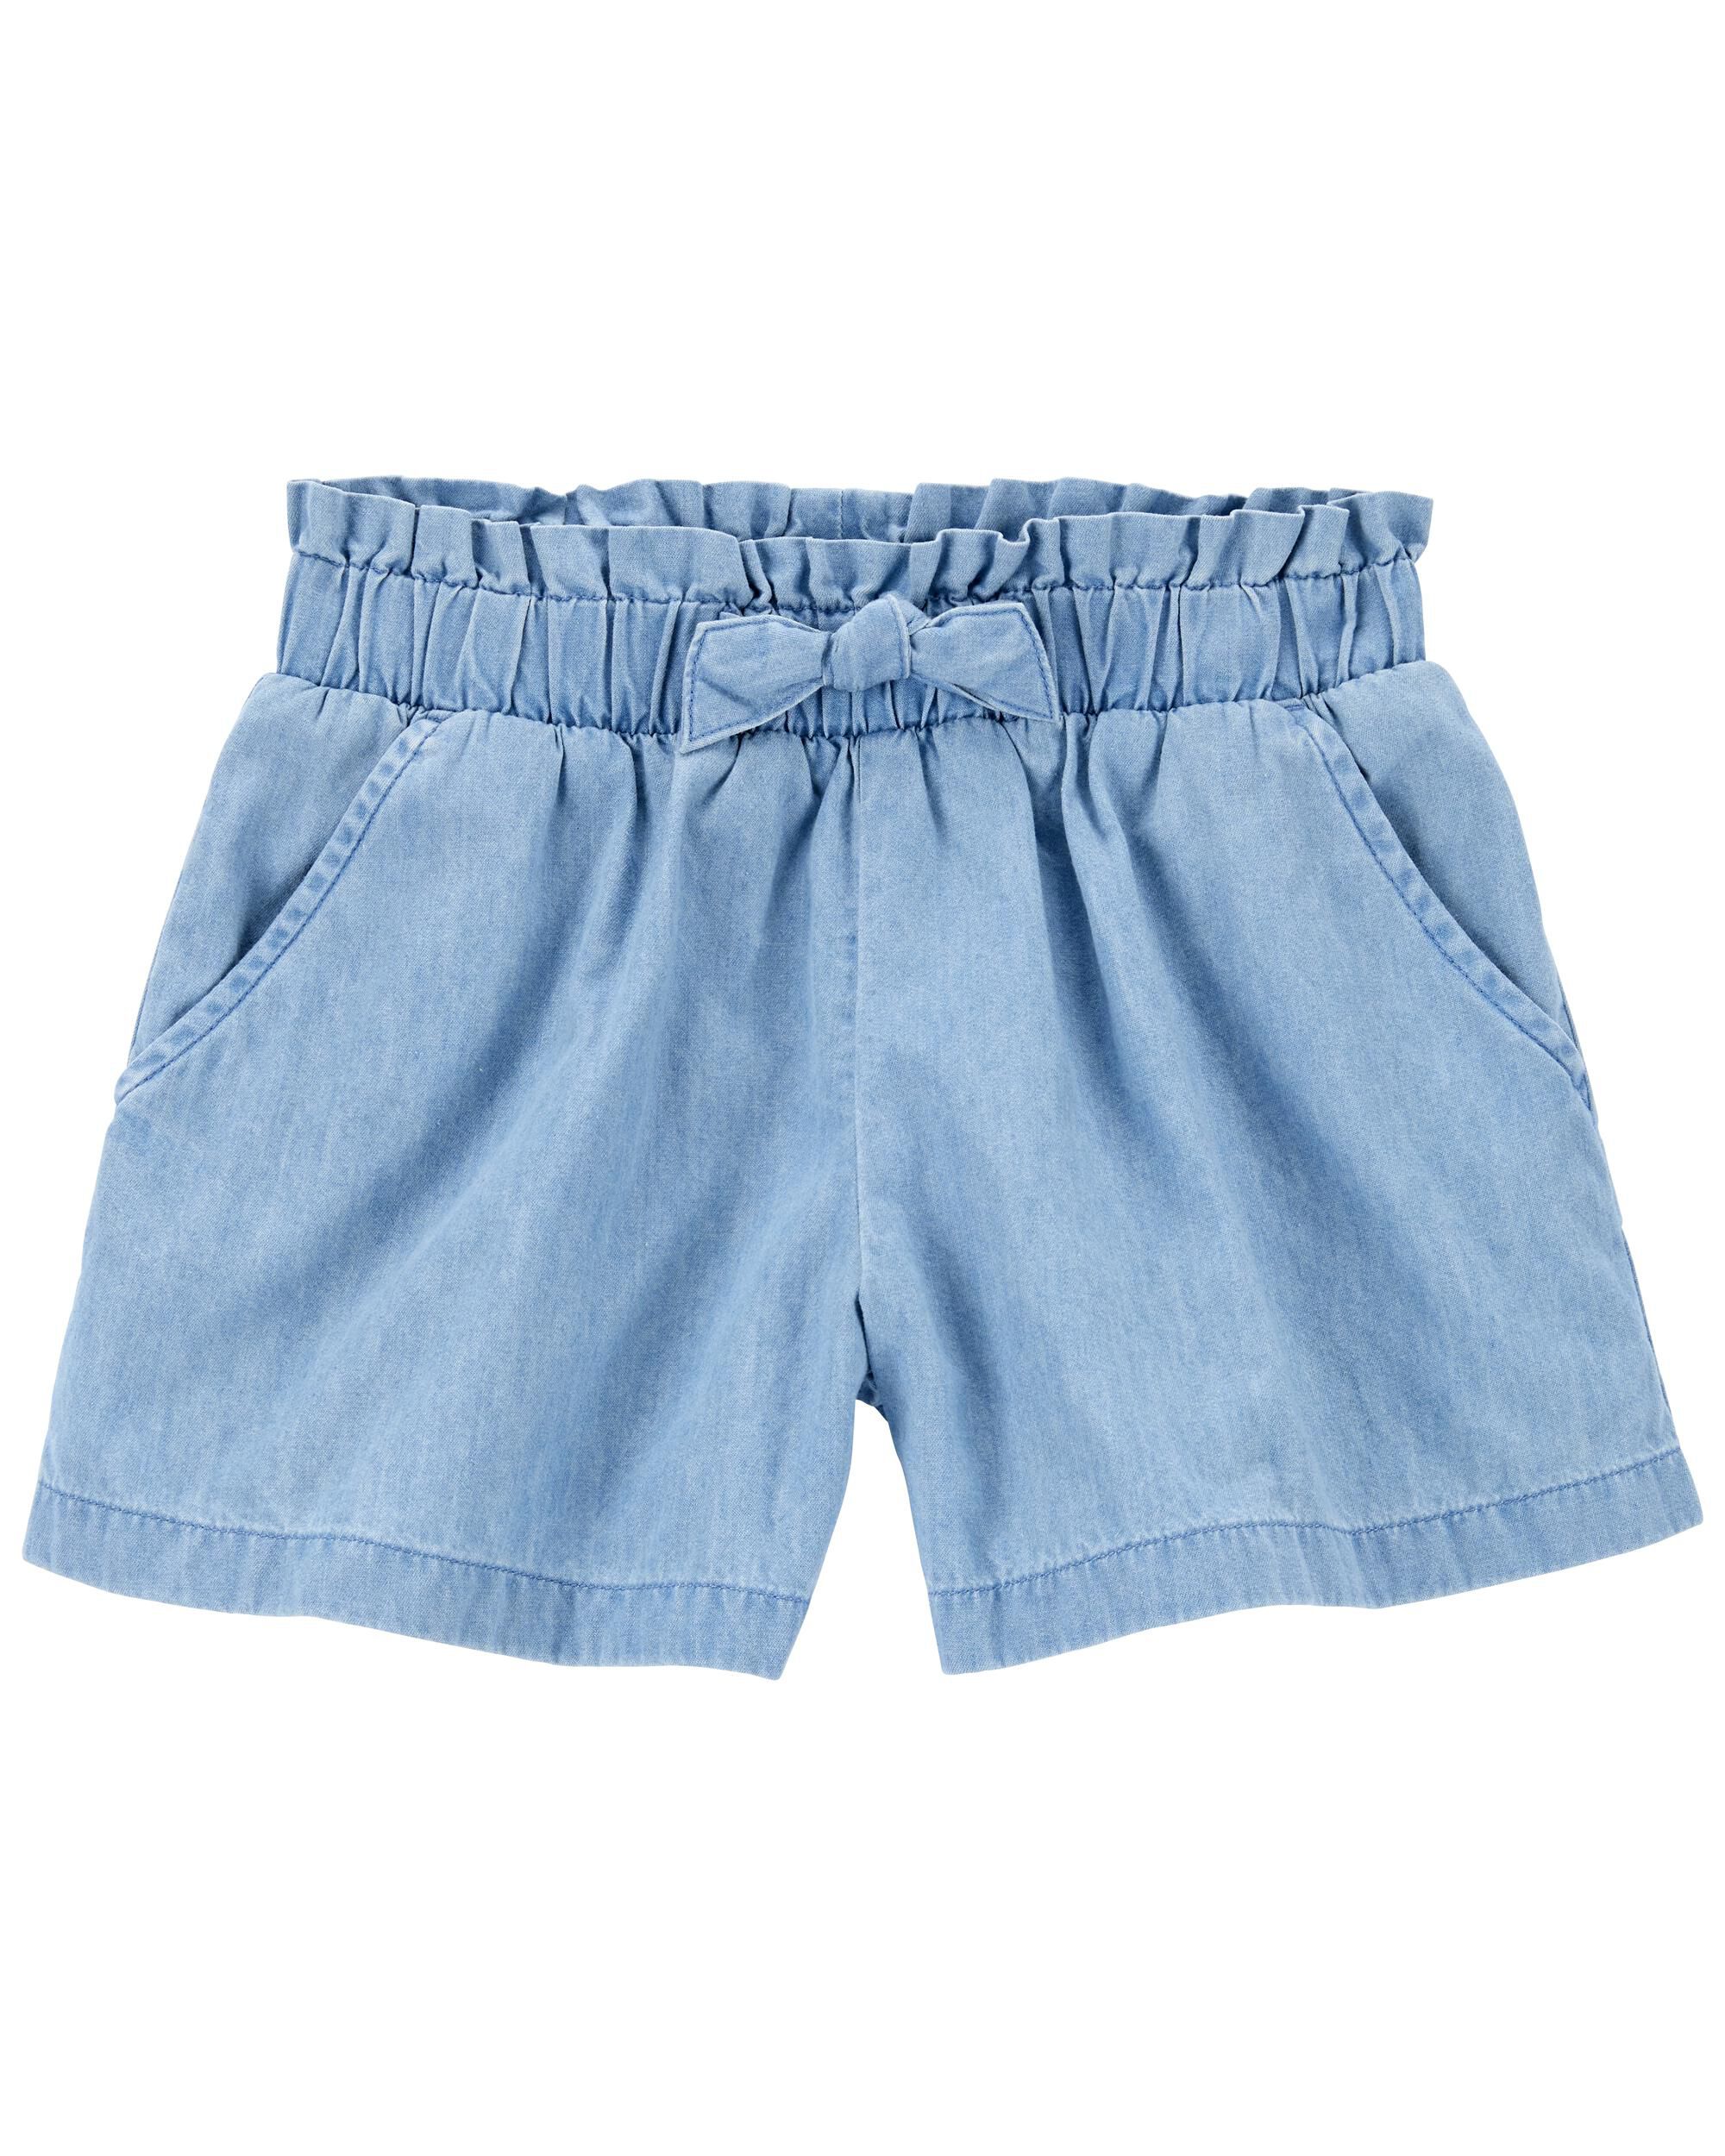 Carters Chambray Pull-On Bubble Shorts